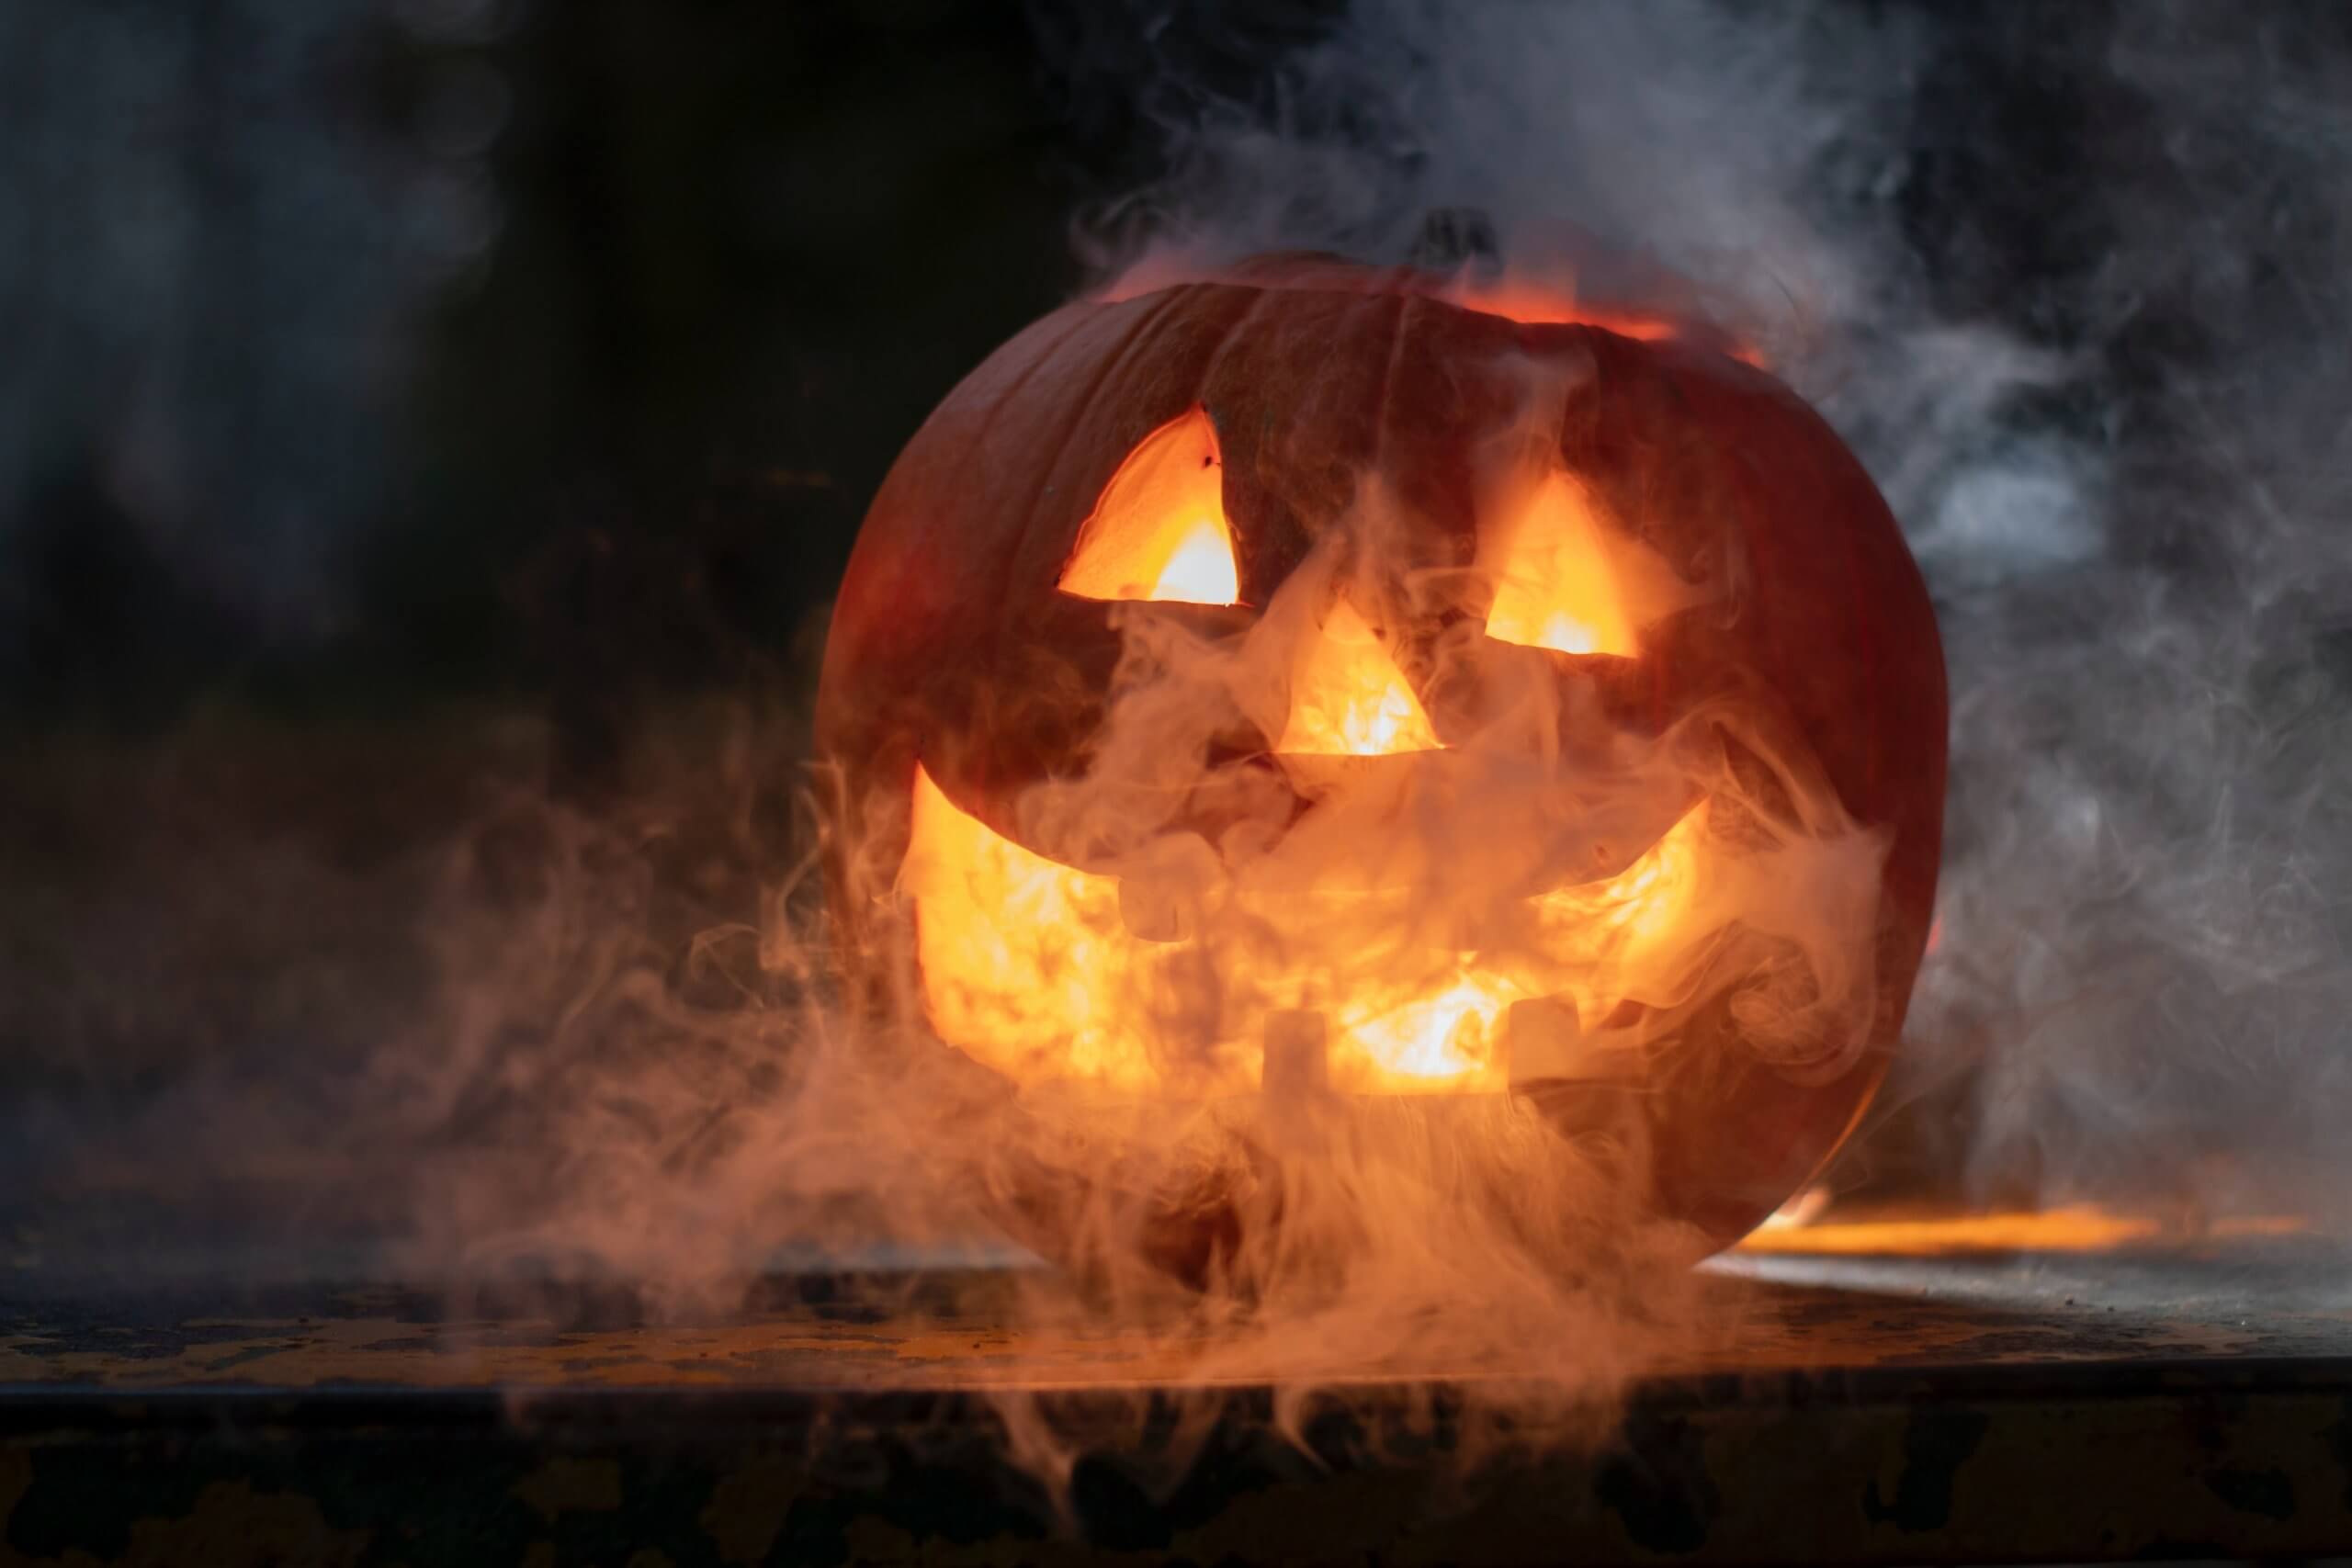 Halloween scary movies and books list, recommendations from a copywriter